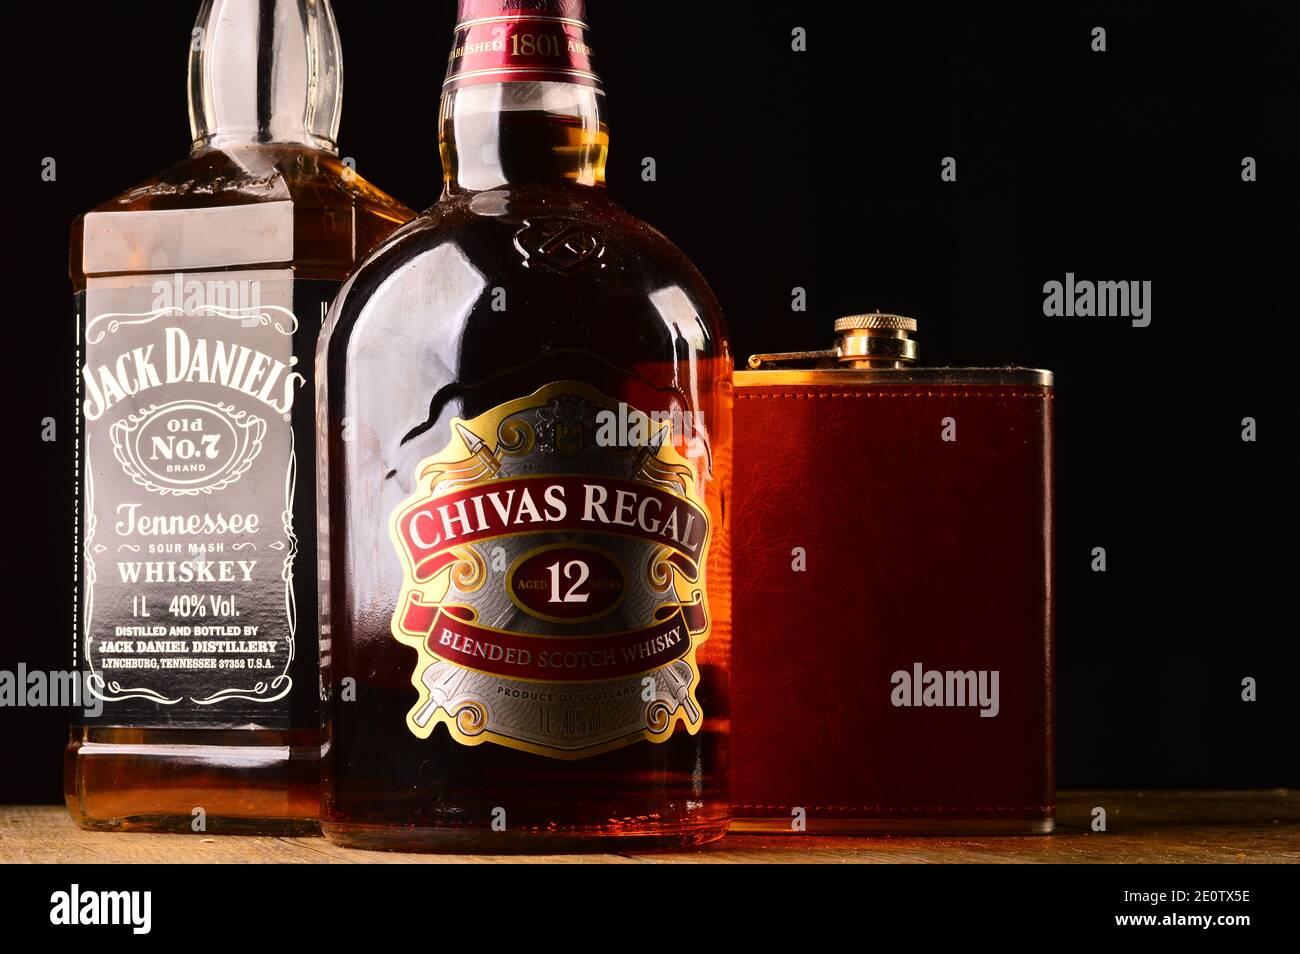 Chivas Regal and Jack Daniel's bottles of whisky on the table Stock Photo -  Alamy